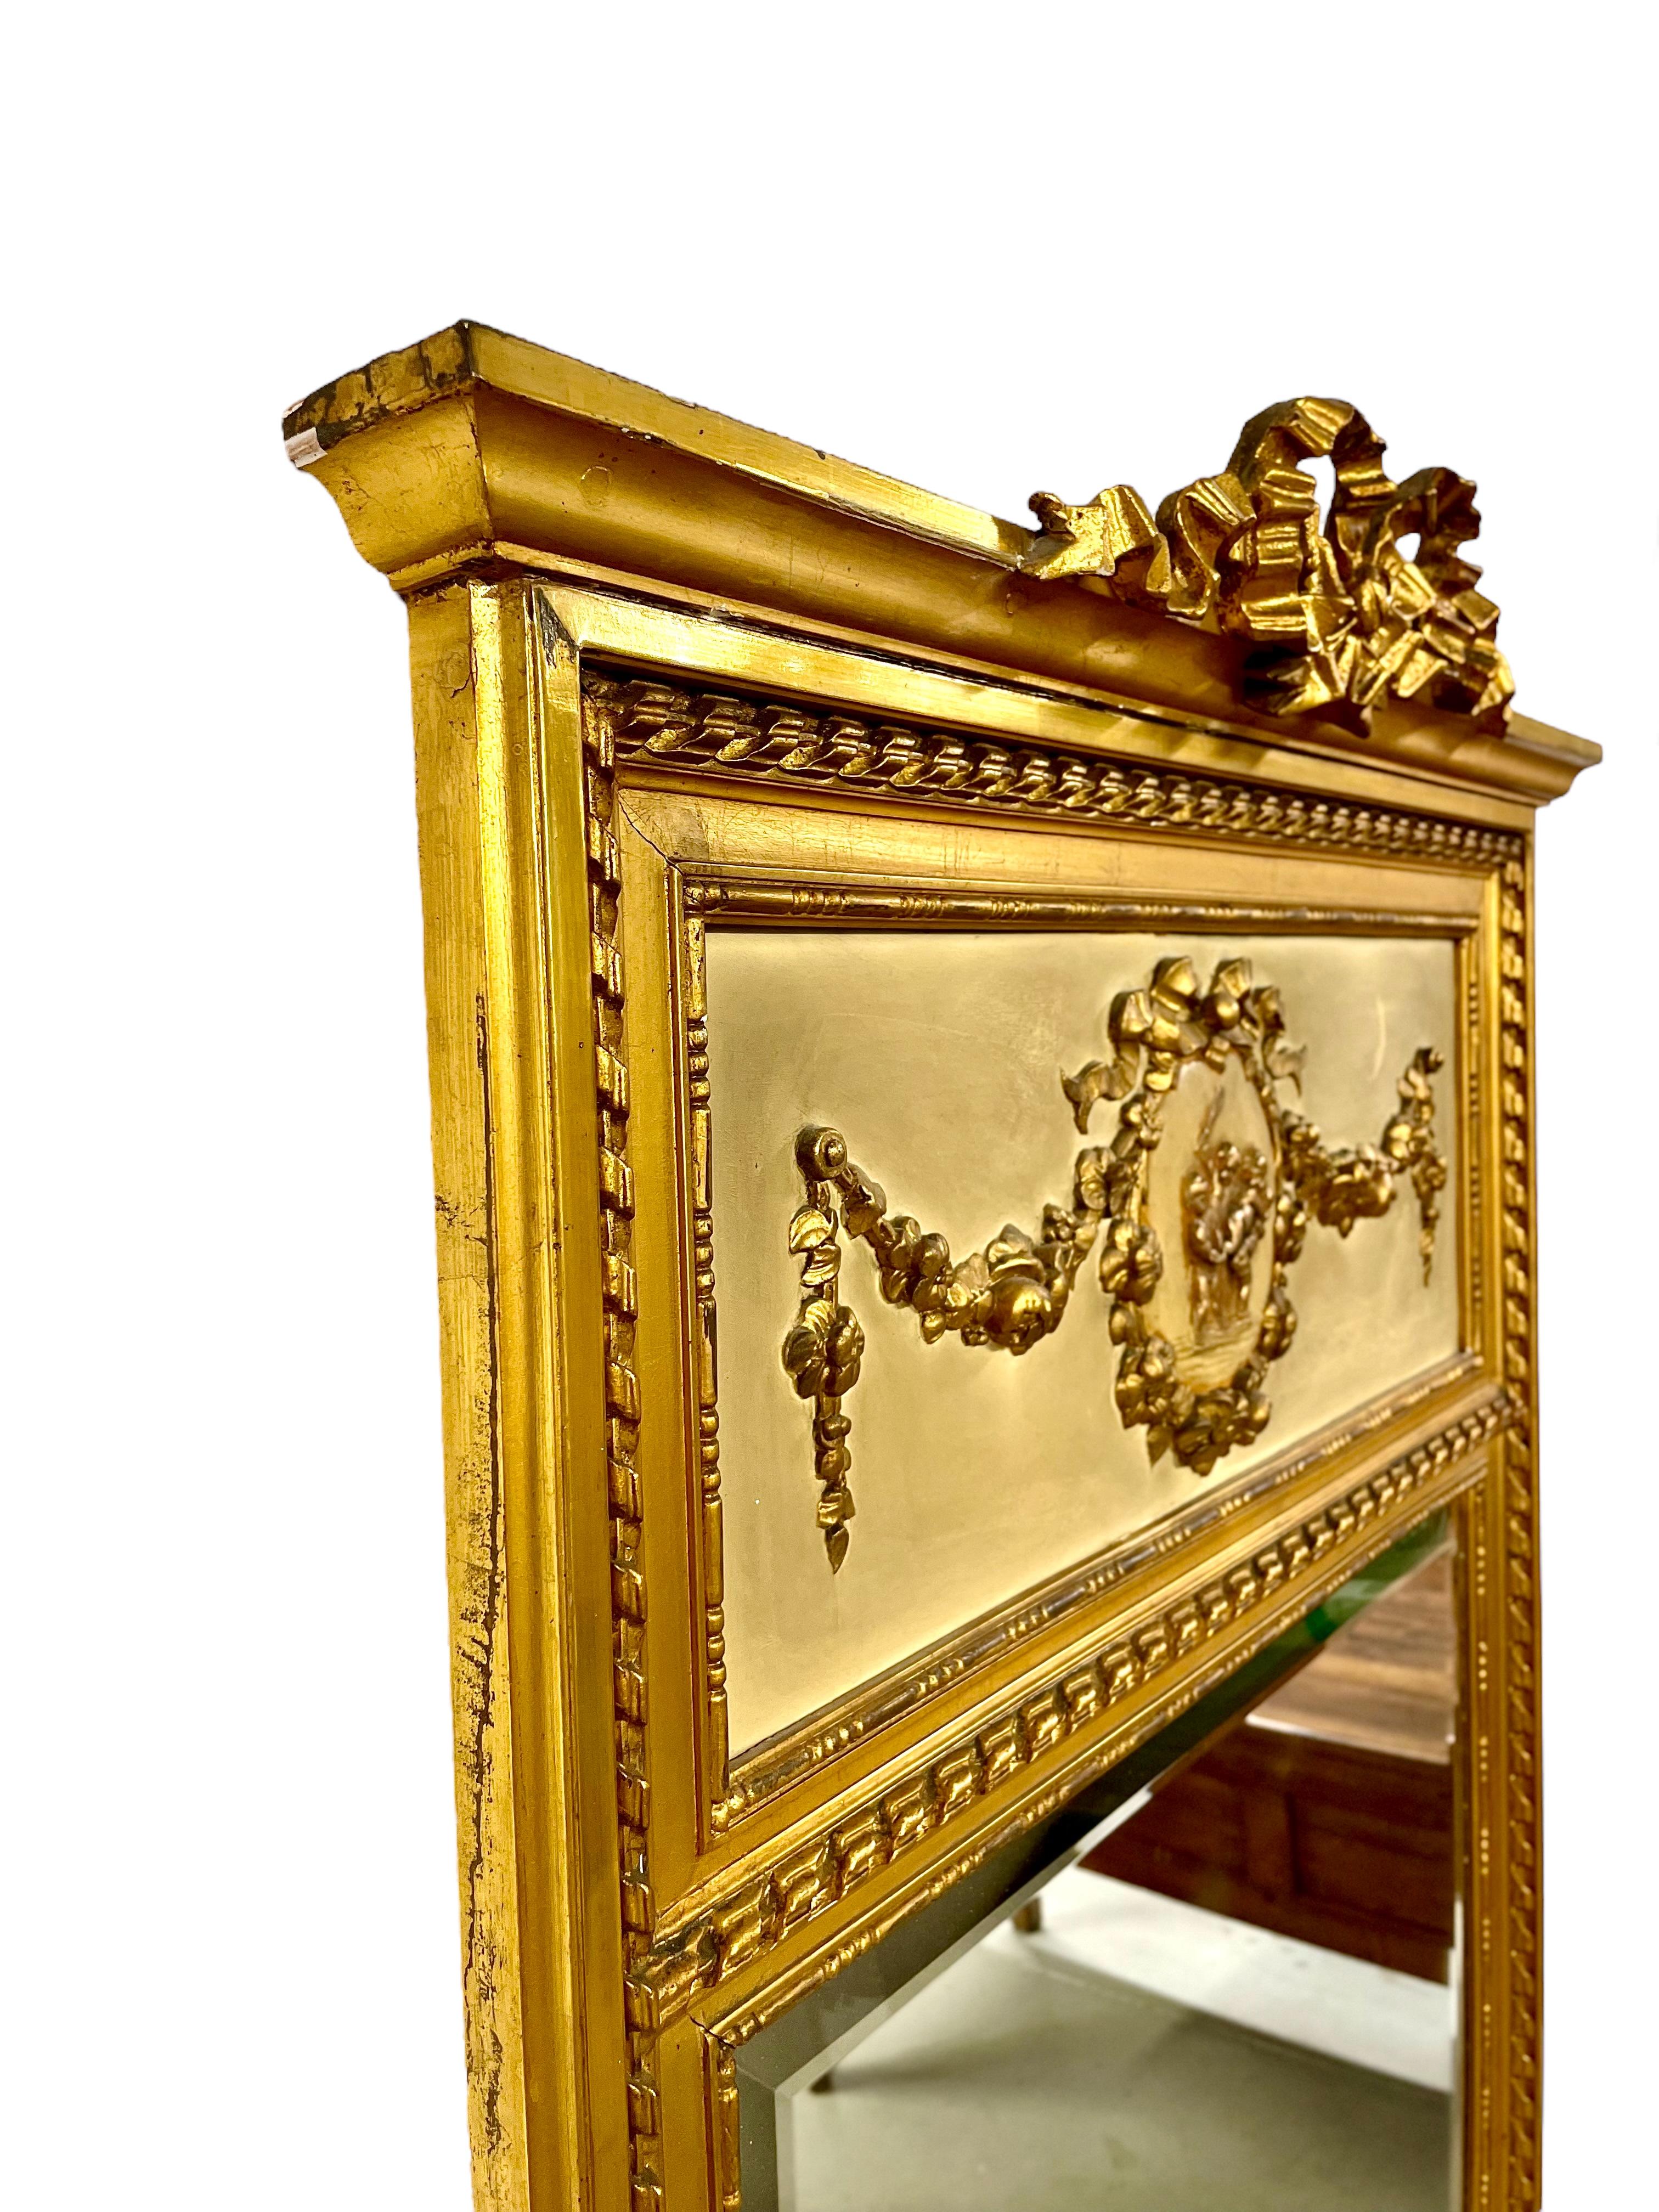 This fabulous full-height Louis XVI-style trumeau mirror is crafted from wood and gilded stucco, its bevelled mirror plate enclosed within an elaborately carved triple-pearl and twisted rope border. Neoclassical in design, the upper portion of the